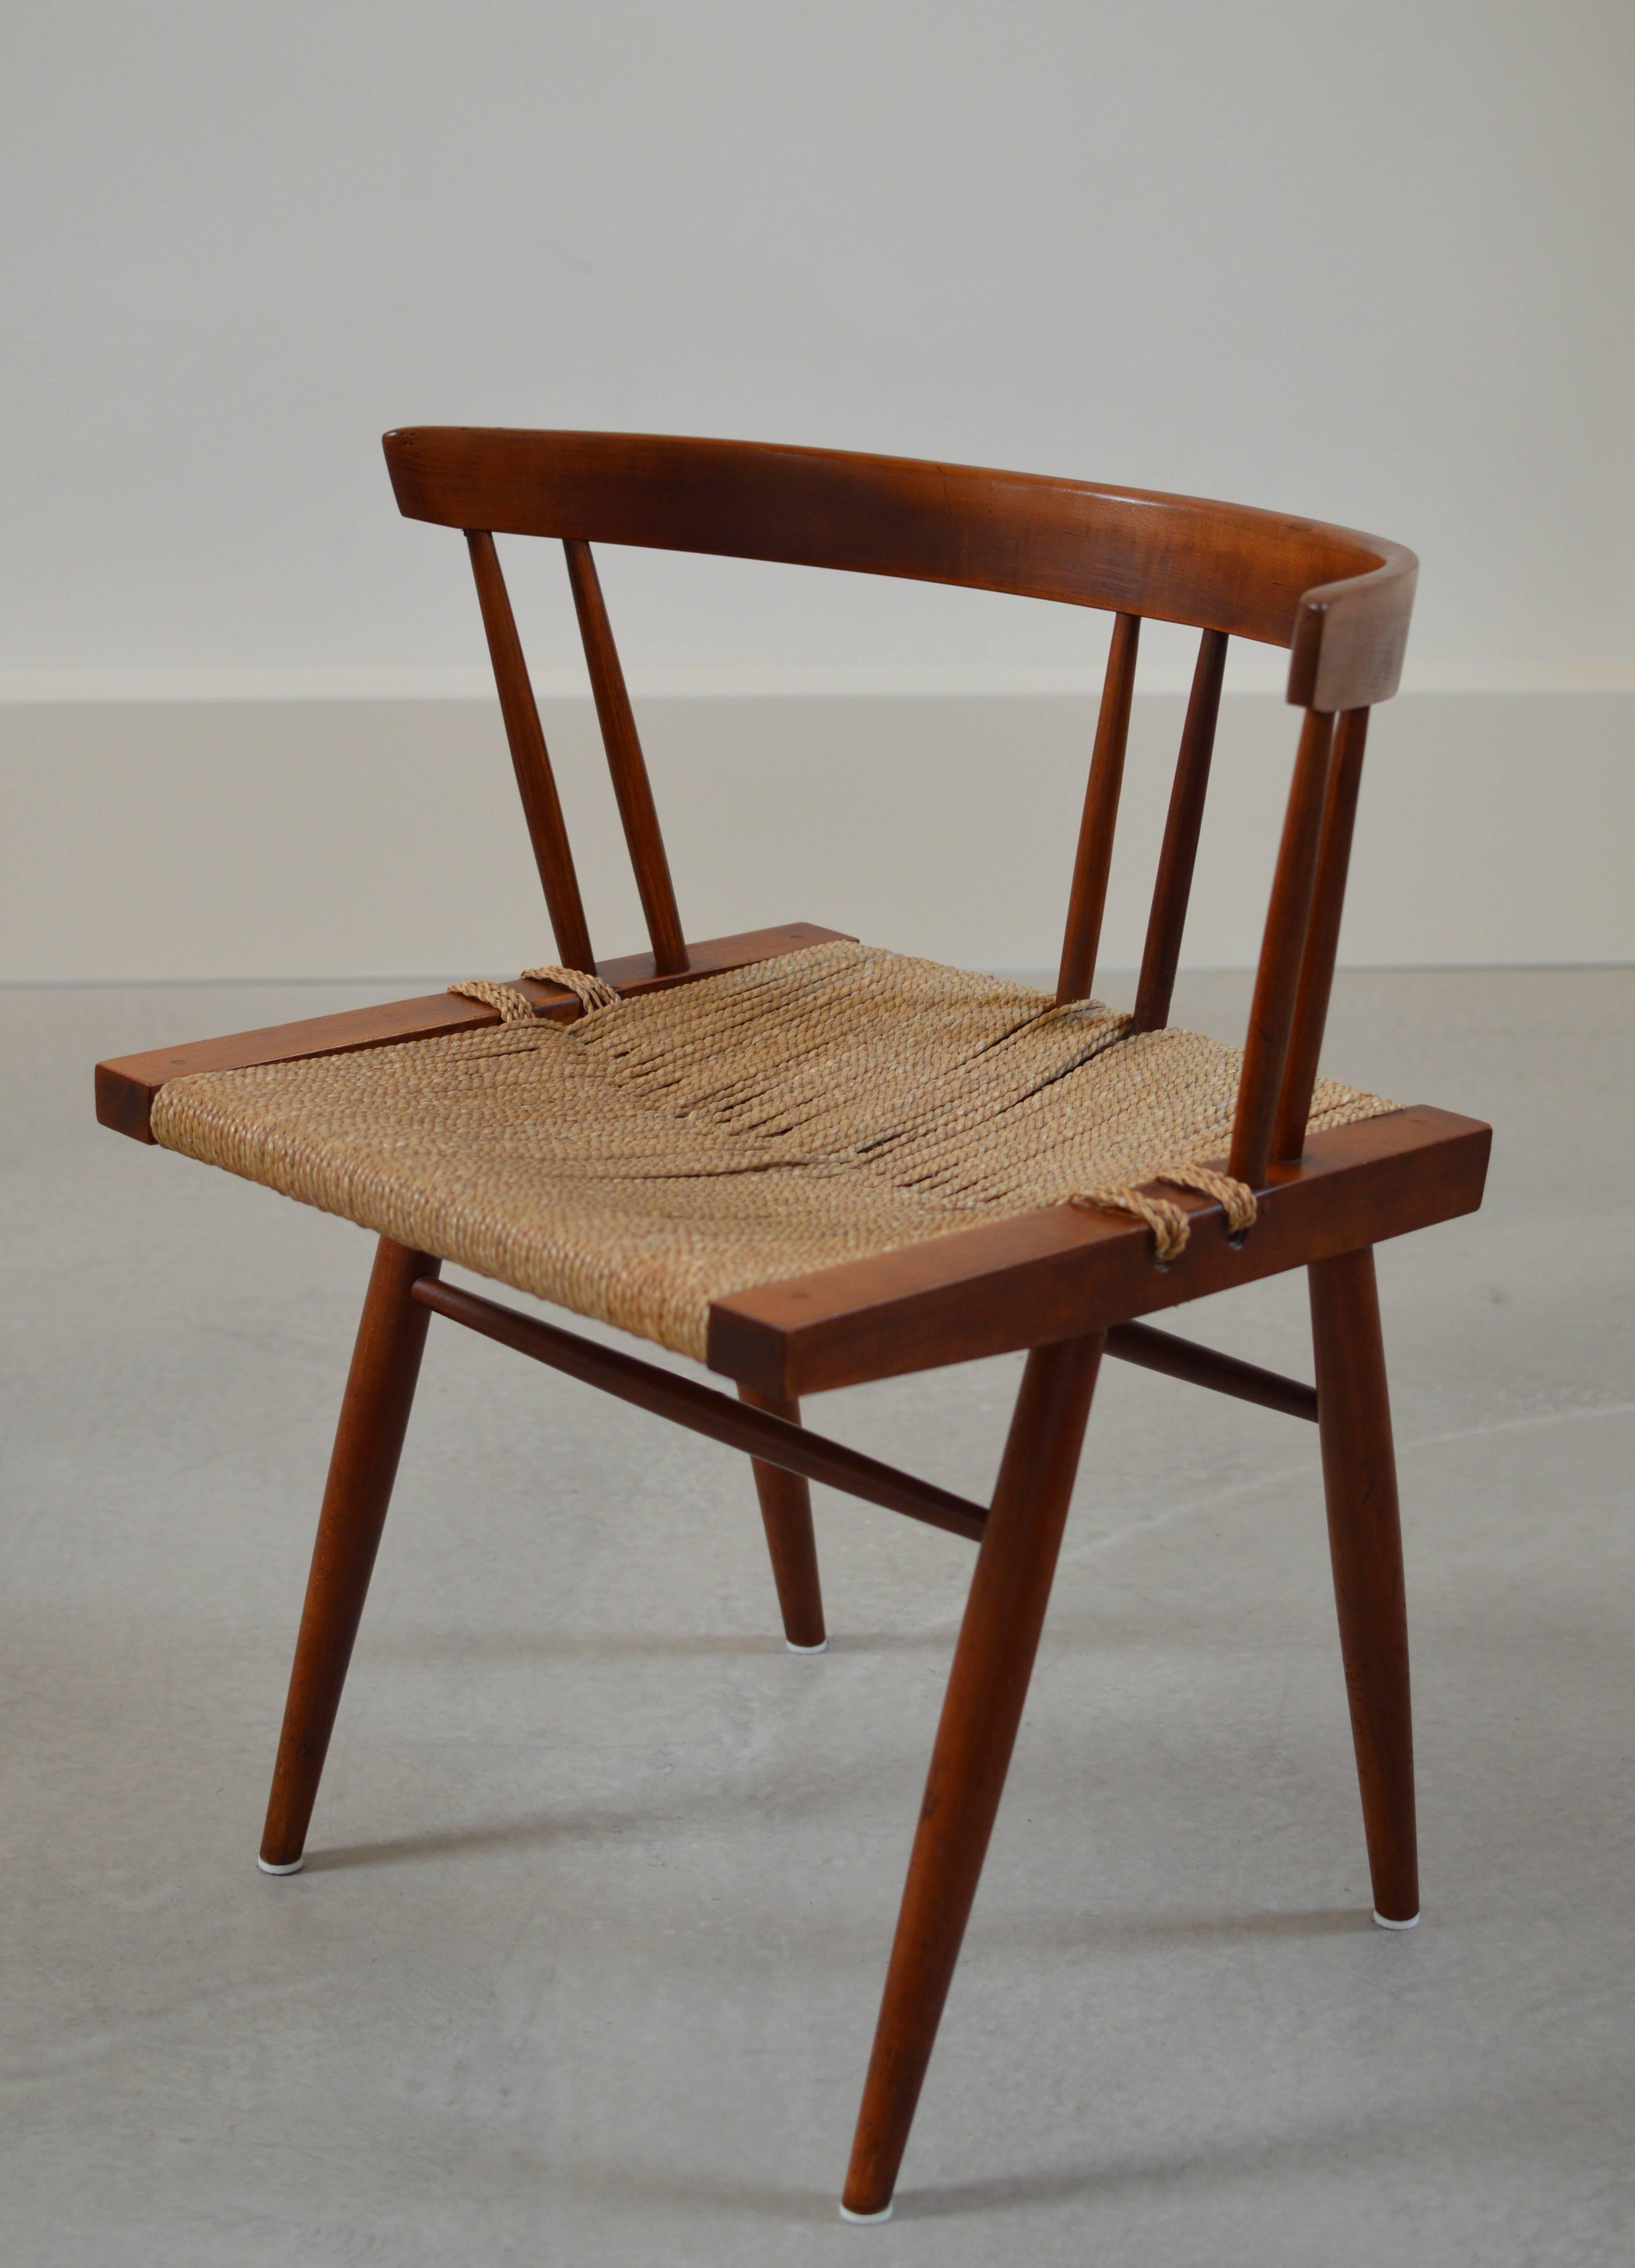 Single grass-seated chair from circa 1950s production in black walnut by George Nakashima, Nakashima Studios.